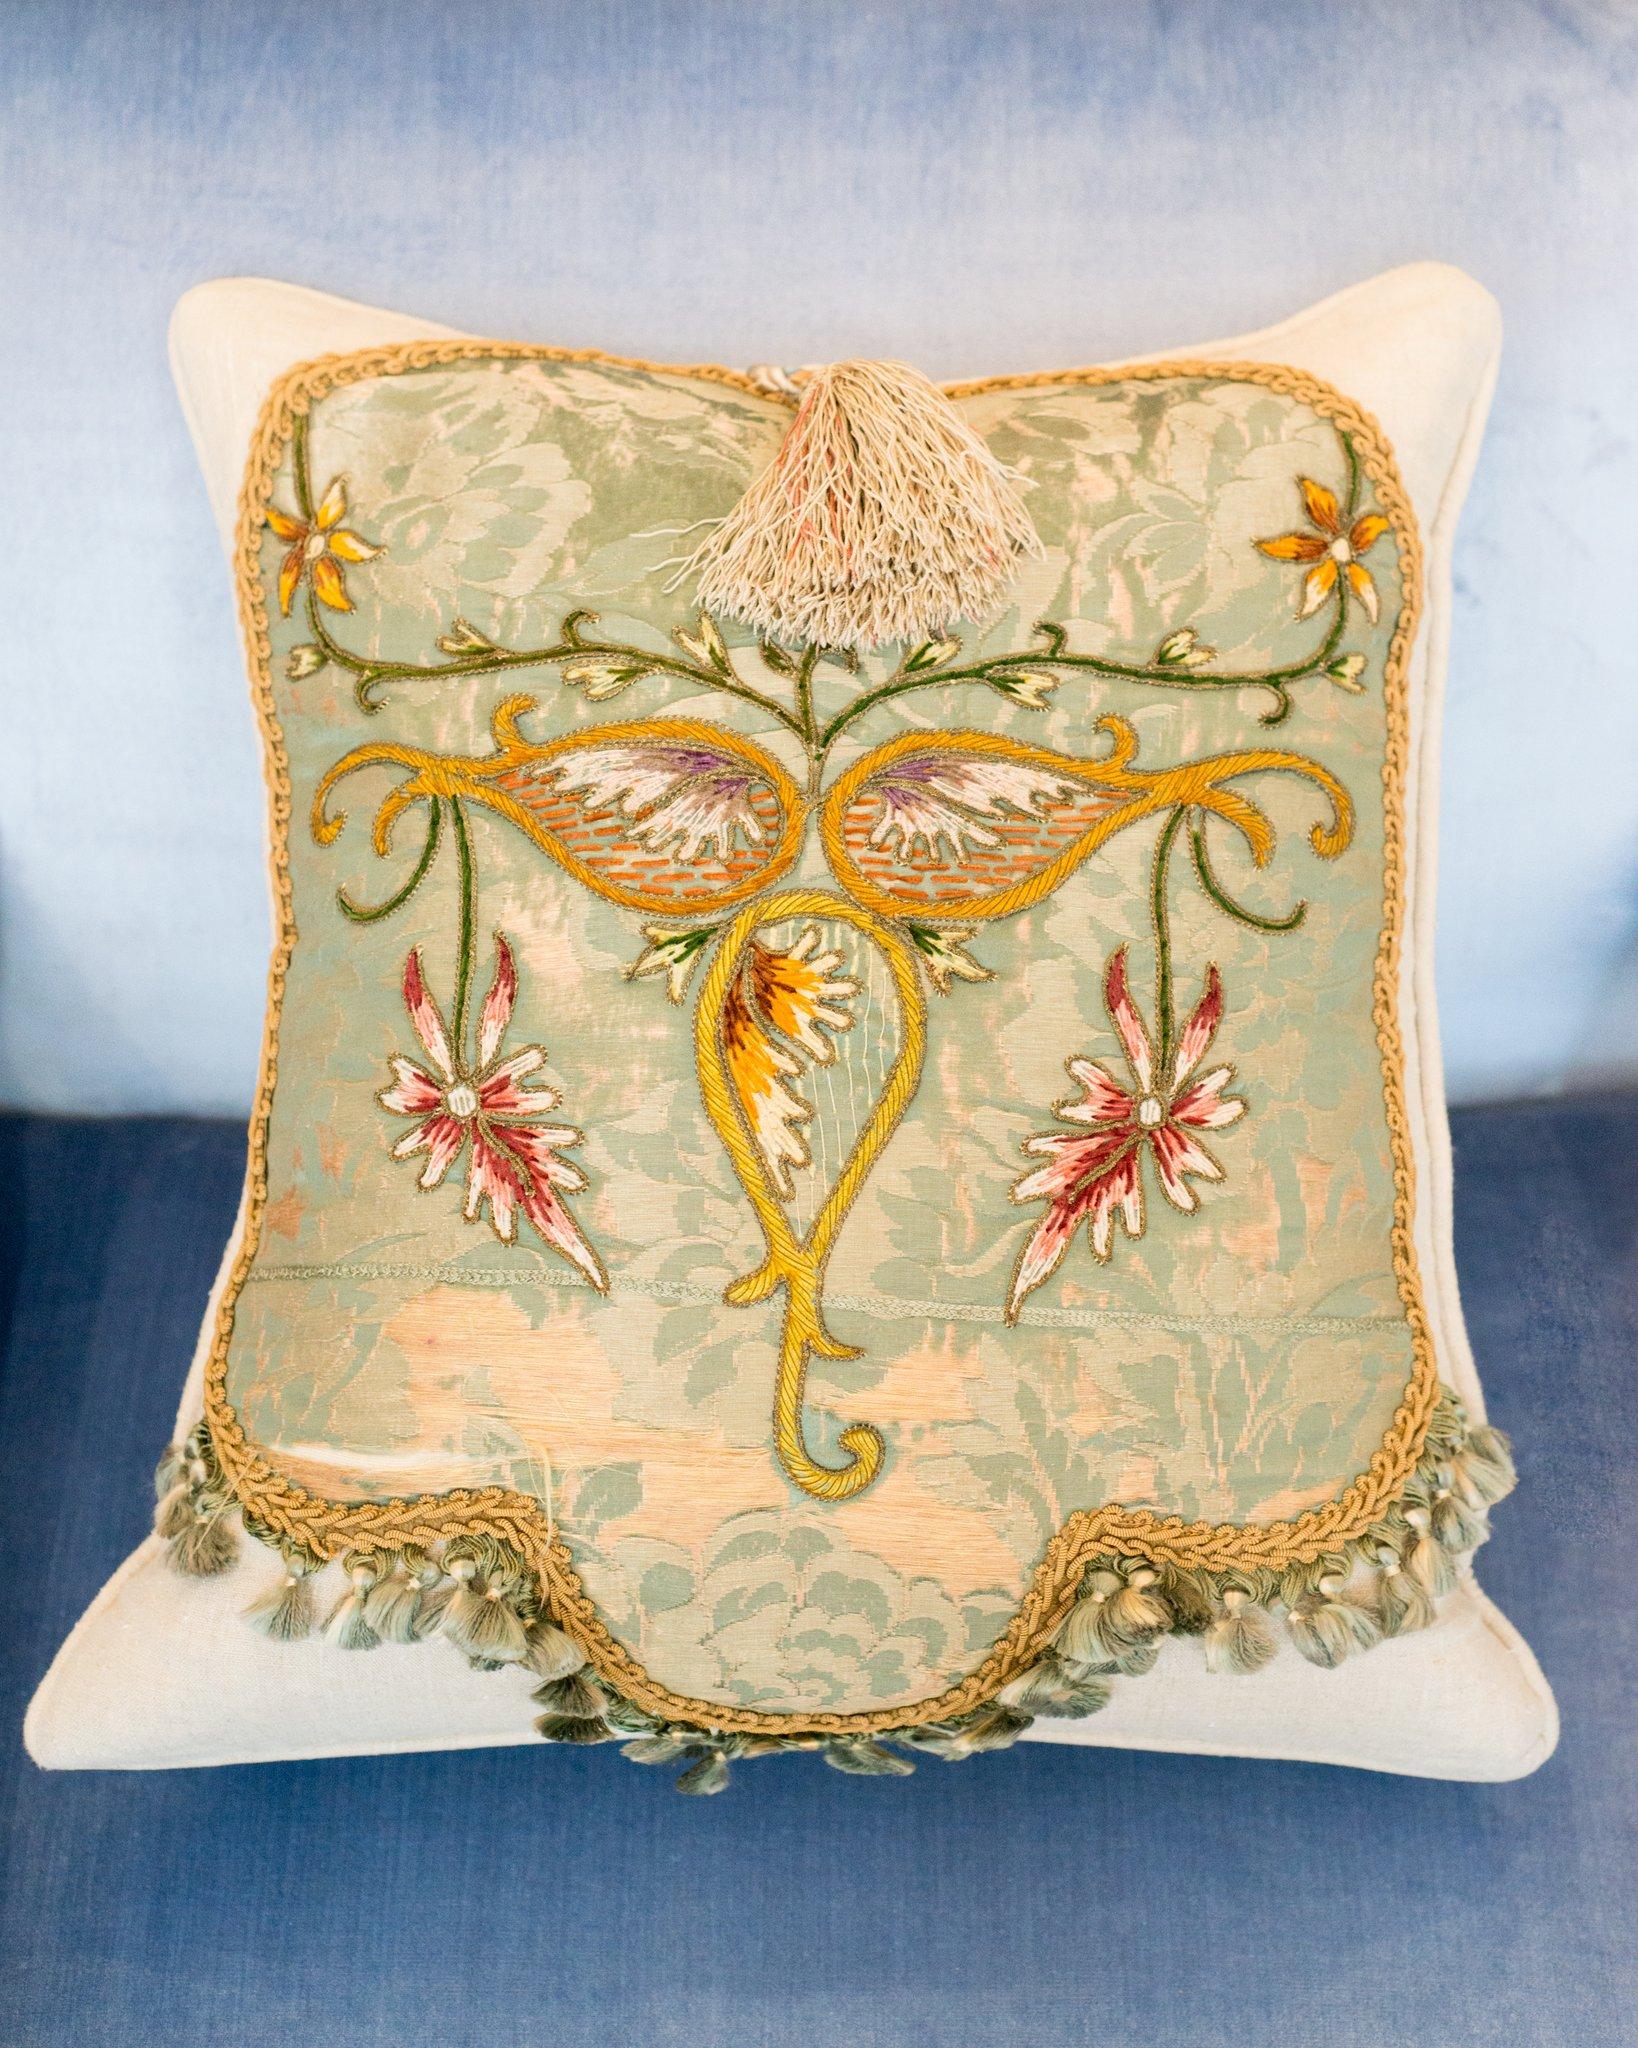 A beautiful cream linen pillow with antique embroidered panel, tassels and metallic rope trim. Filled with 100% Canadian Down and Feather insert.